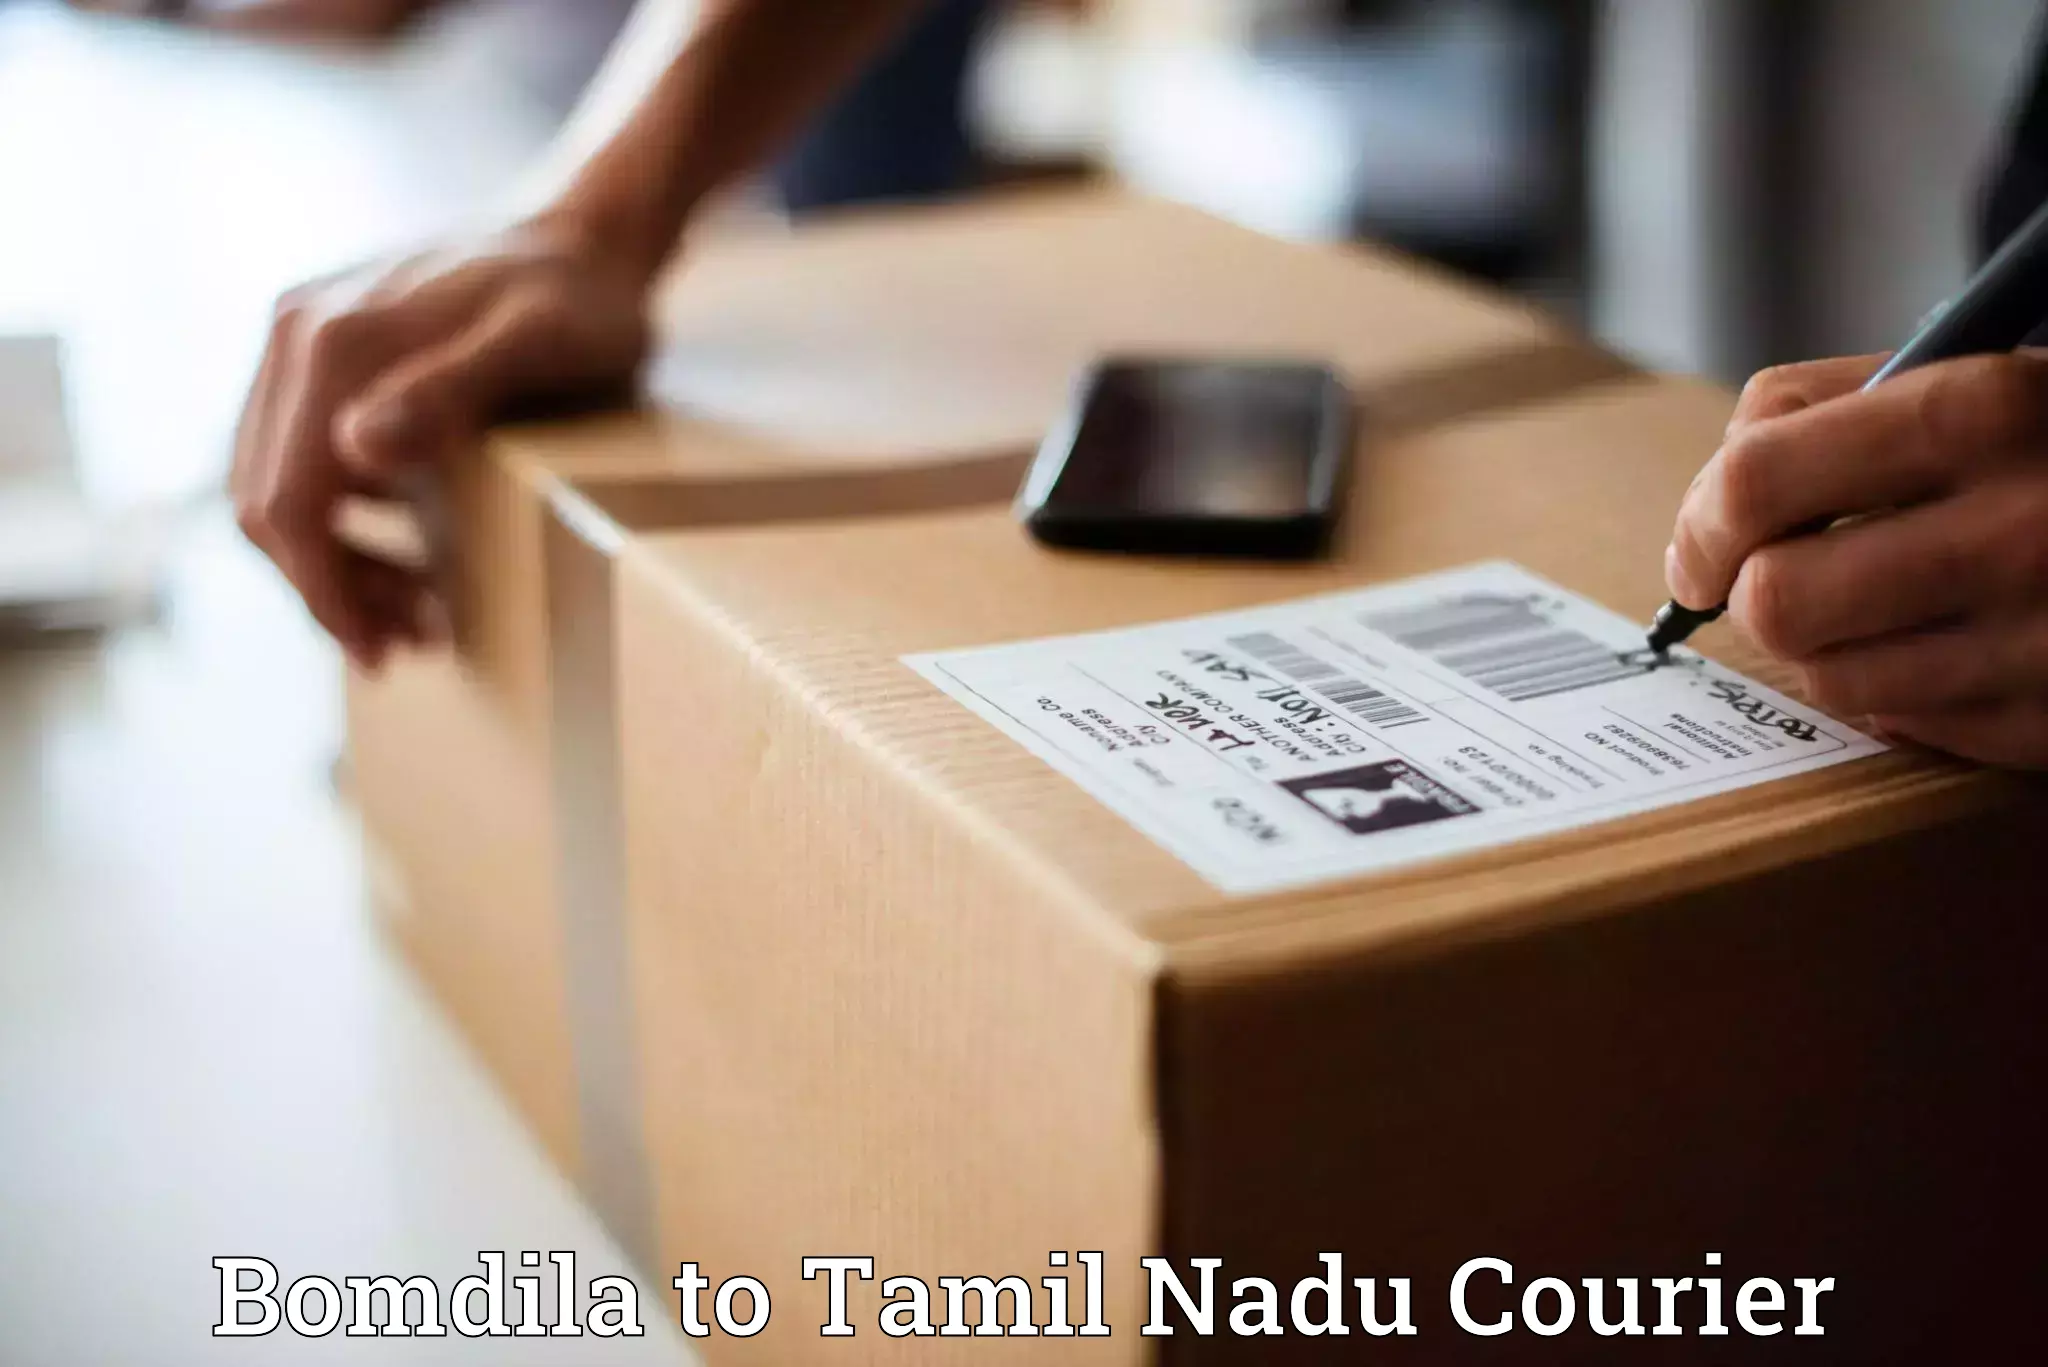 High-quality delivery services in Bomdila to Chennai